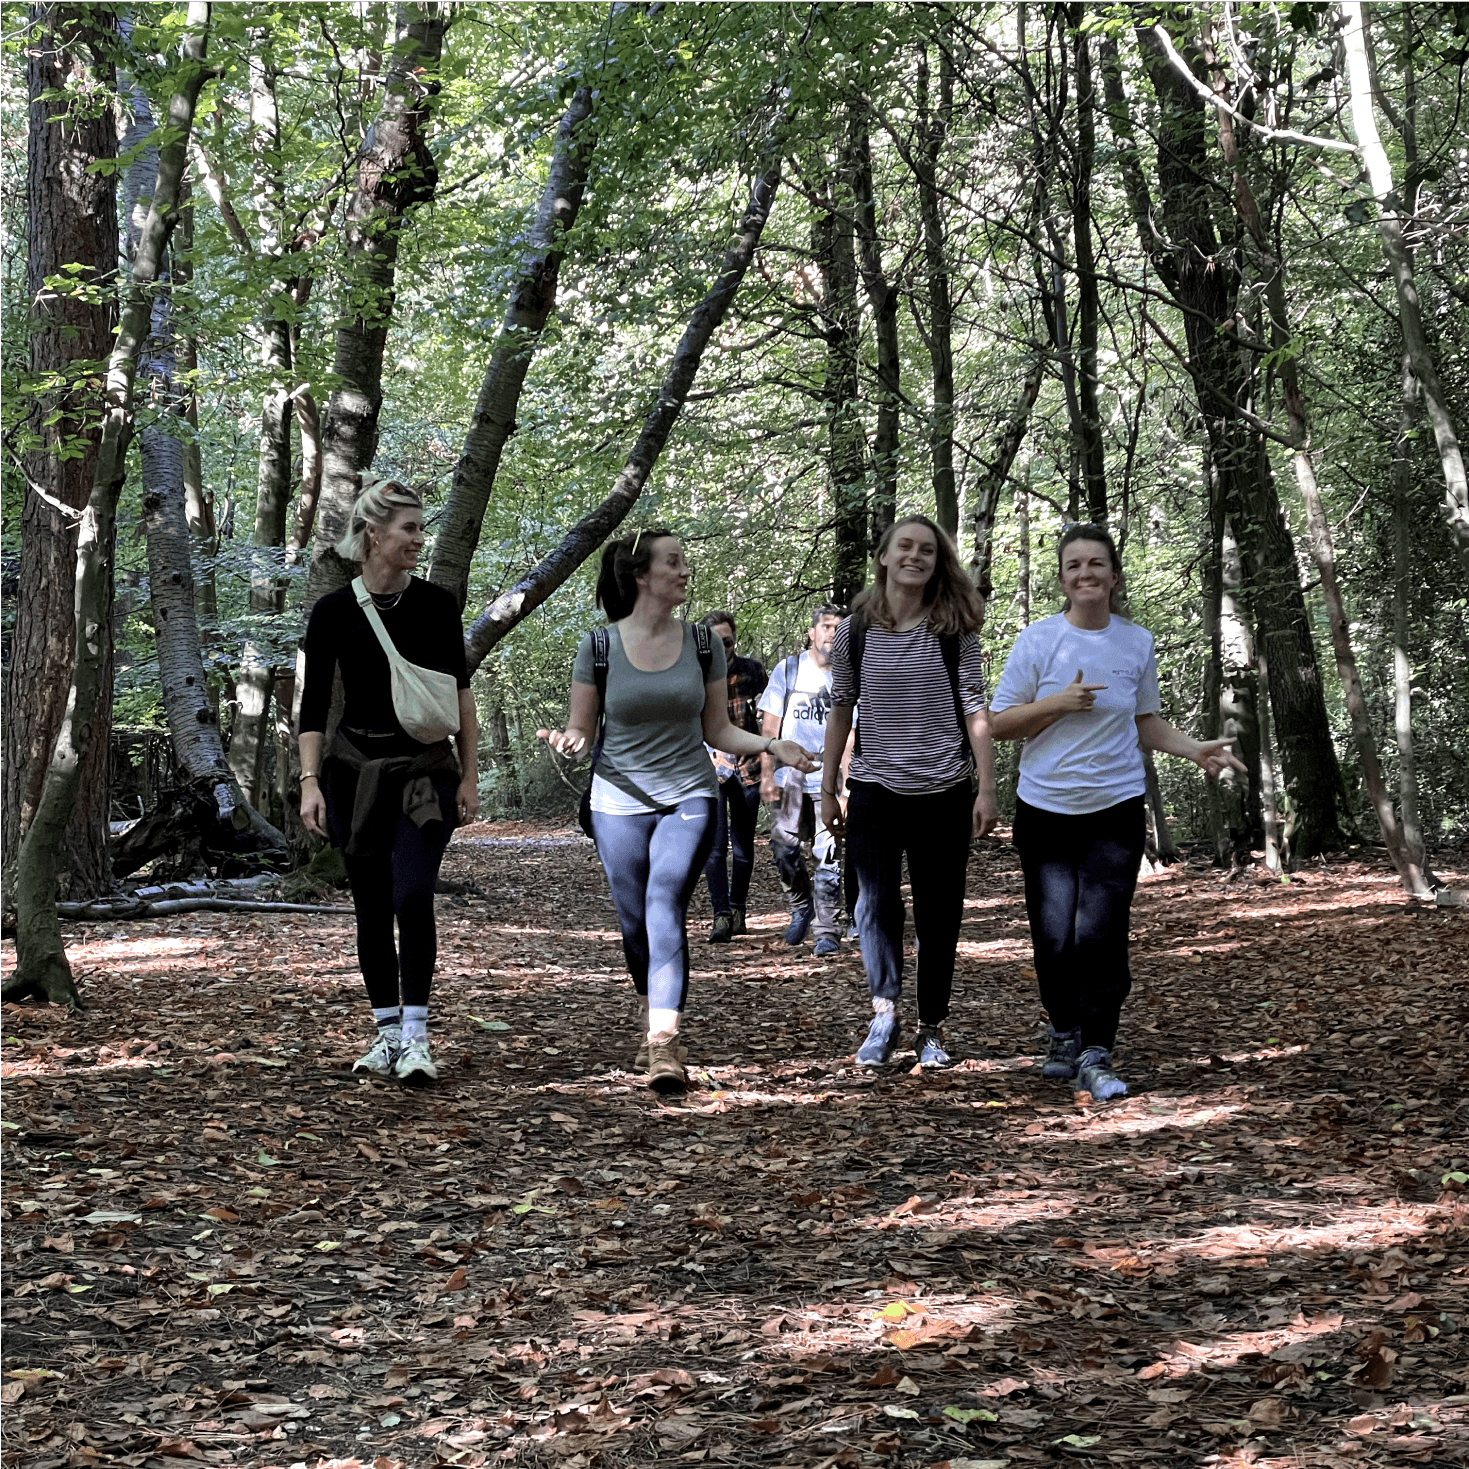 Members of the team walking in a forest